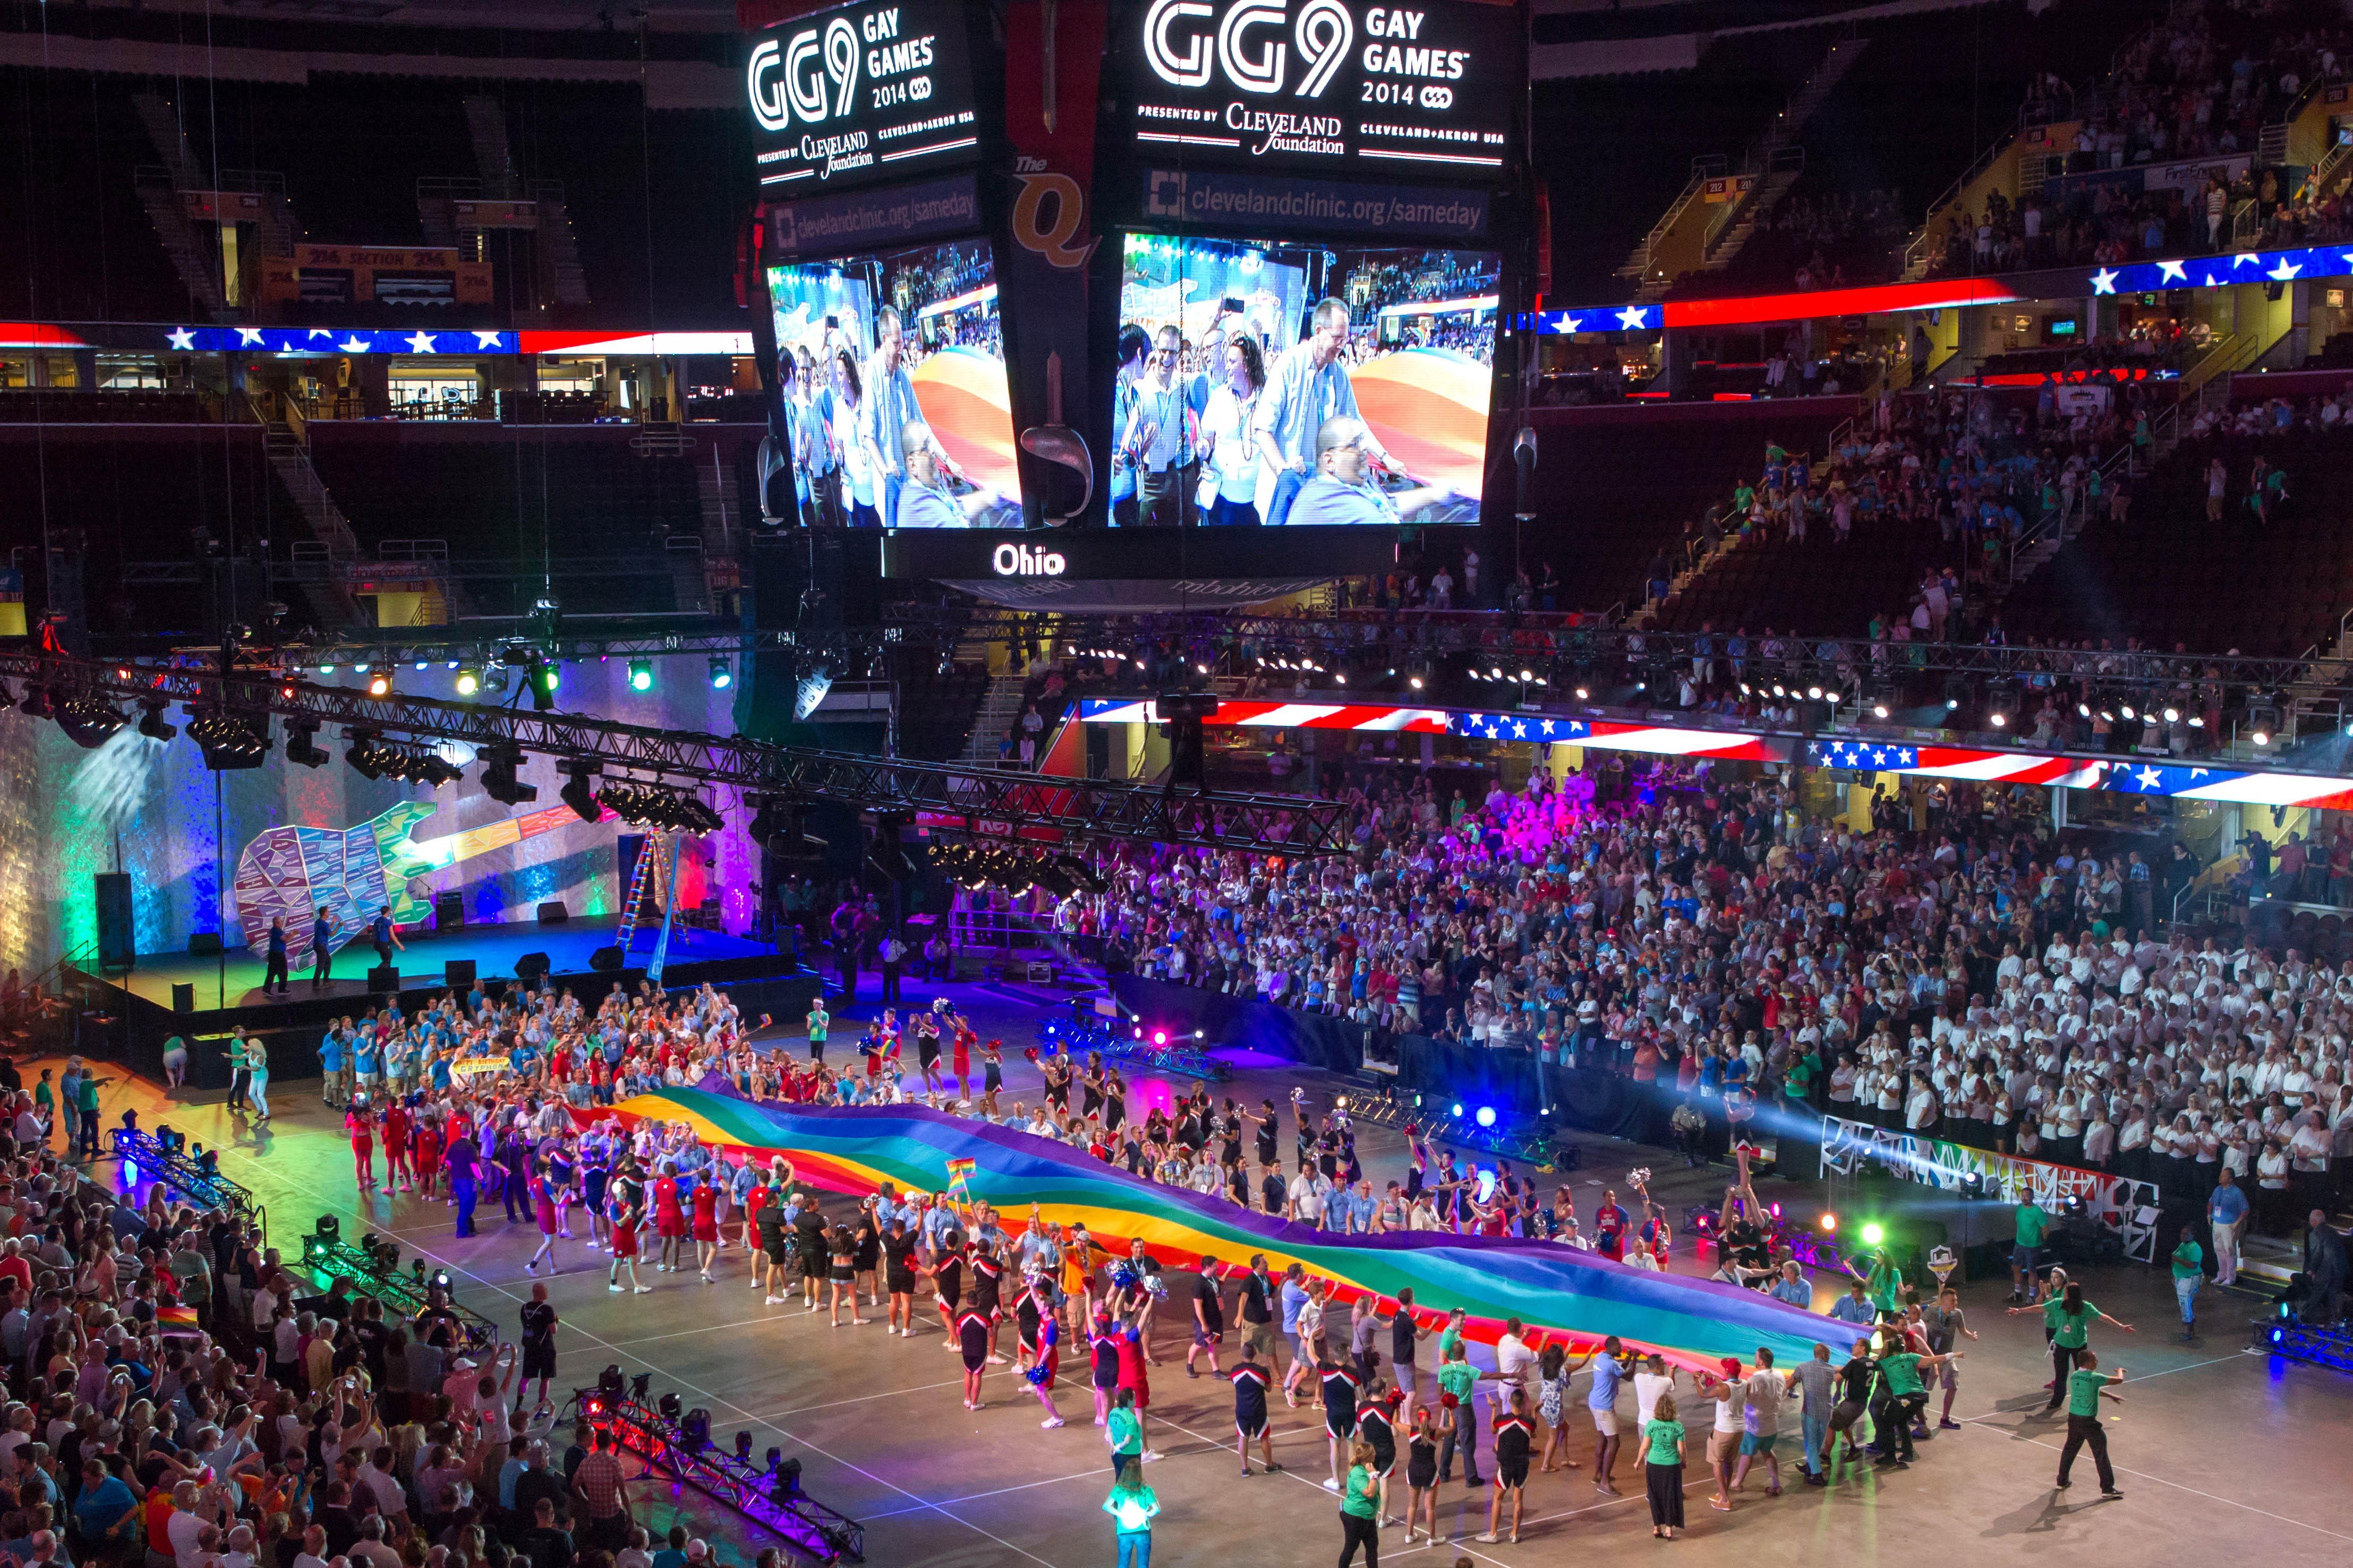 The opening ceremony for the Gay Games 2014, in Cleveland, Ohio. Next year’s edition will be held in Paris, with Hong Kong hosting in 2022. Photo: Alamy Stock Photo